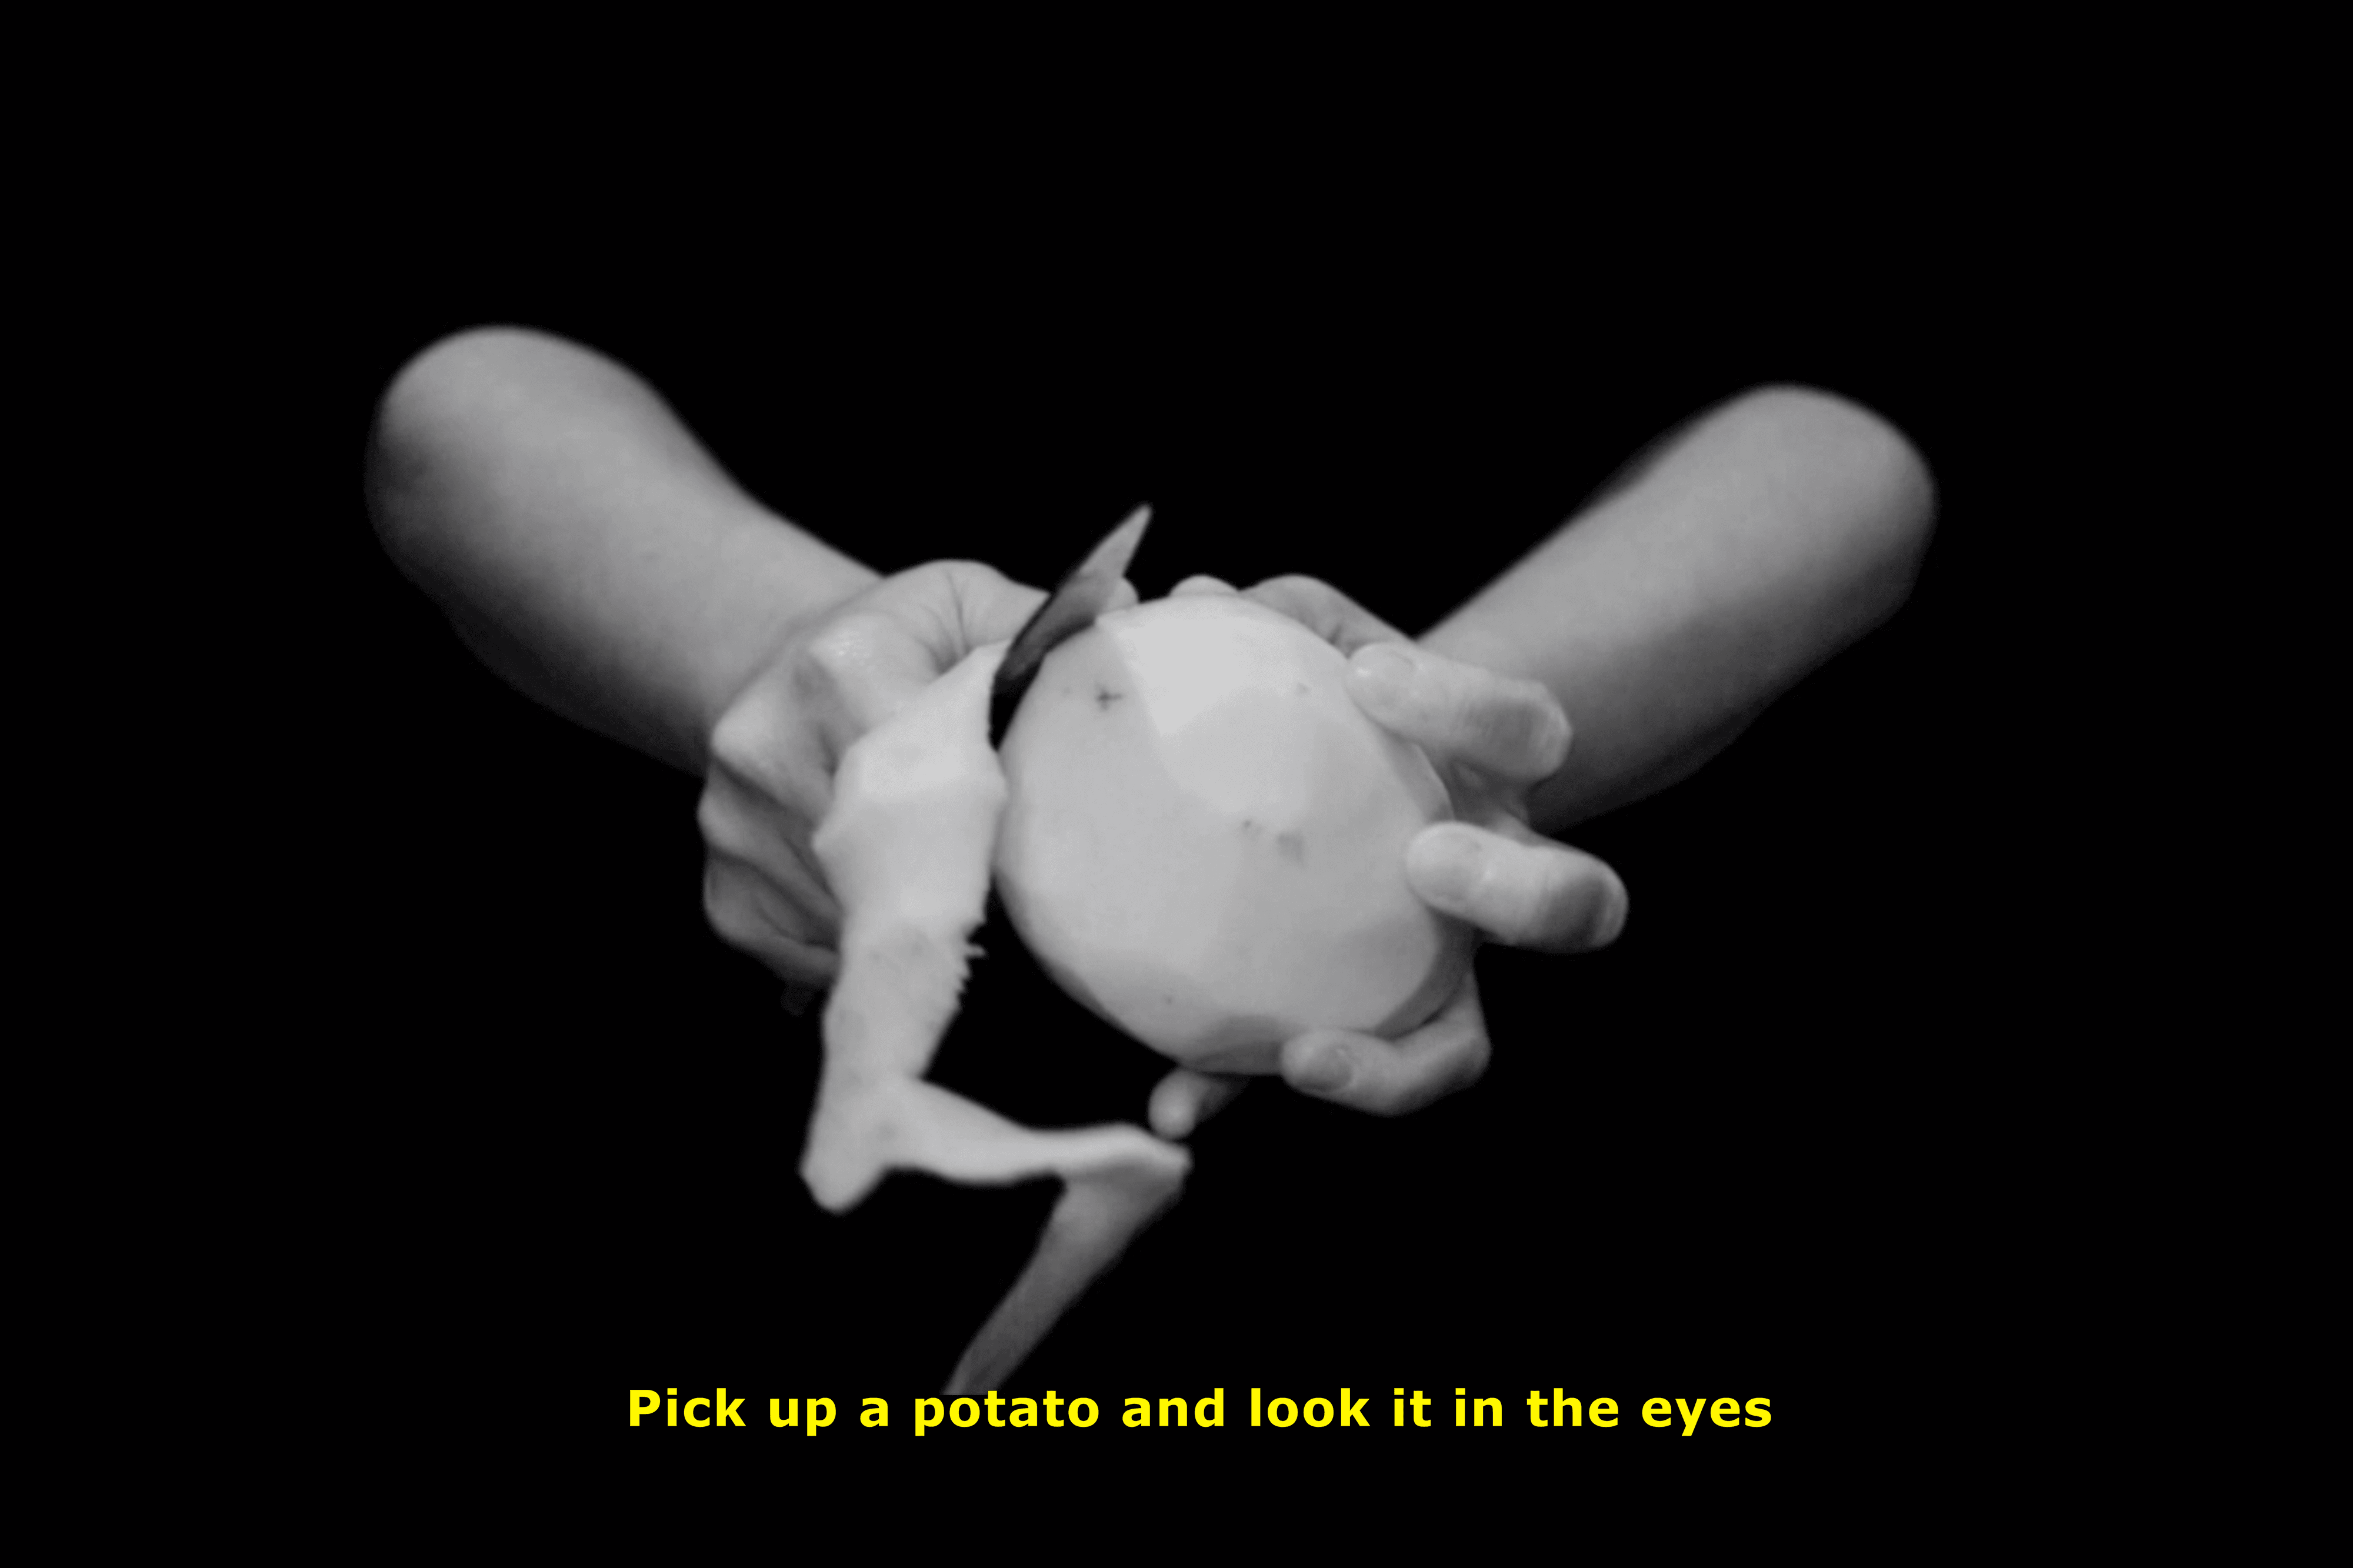 Pick up a potato and look it in the eyes